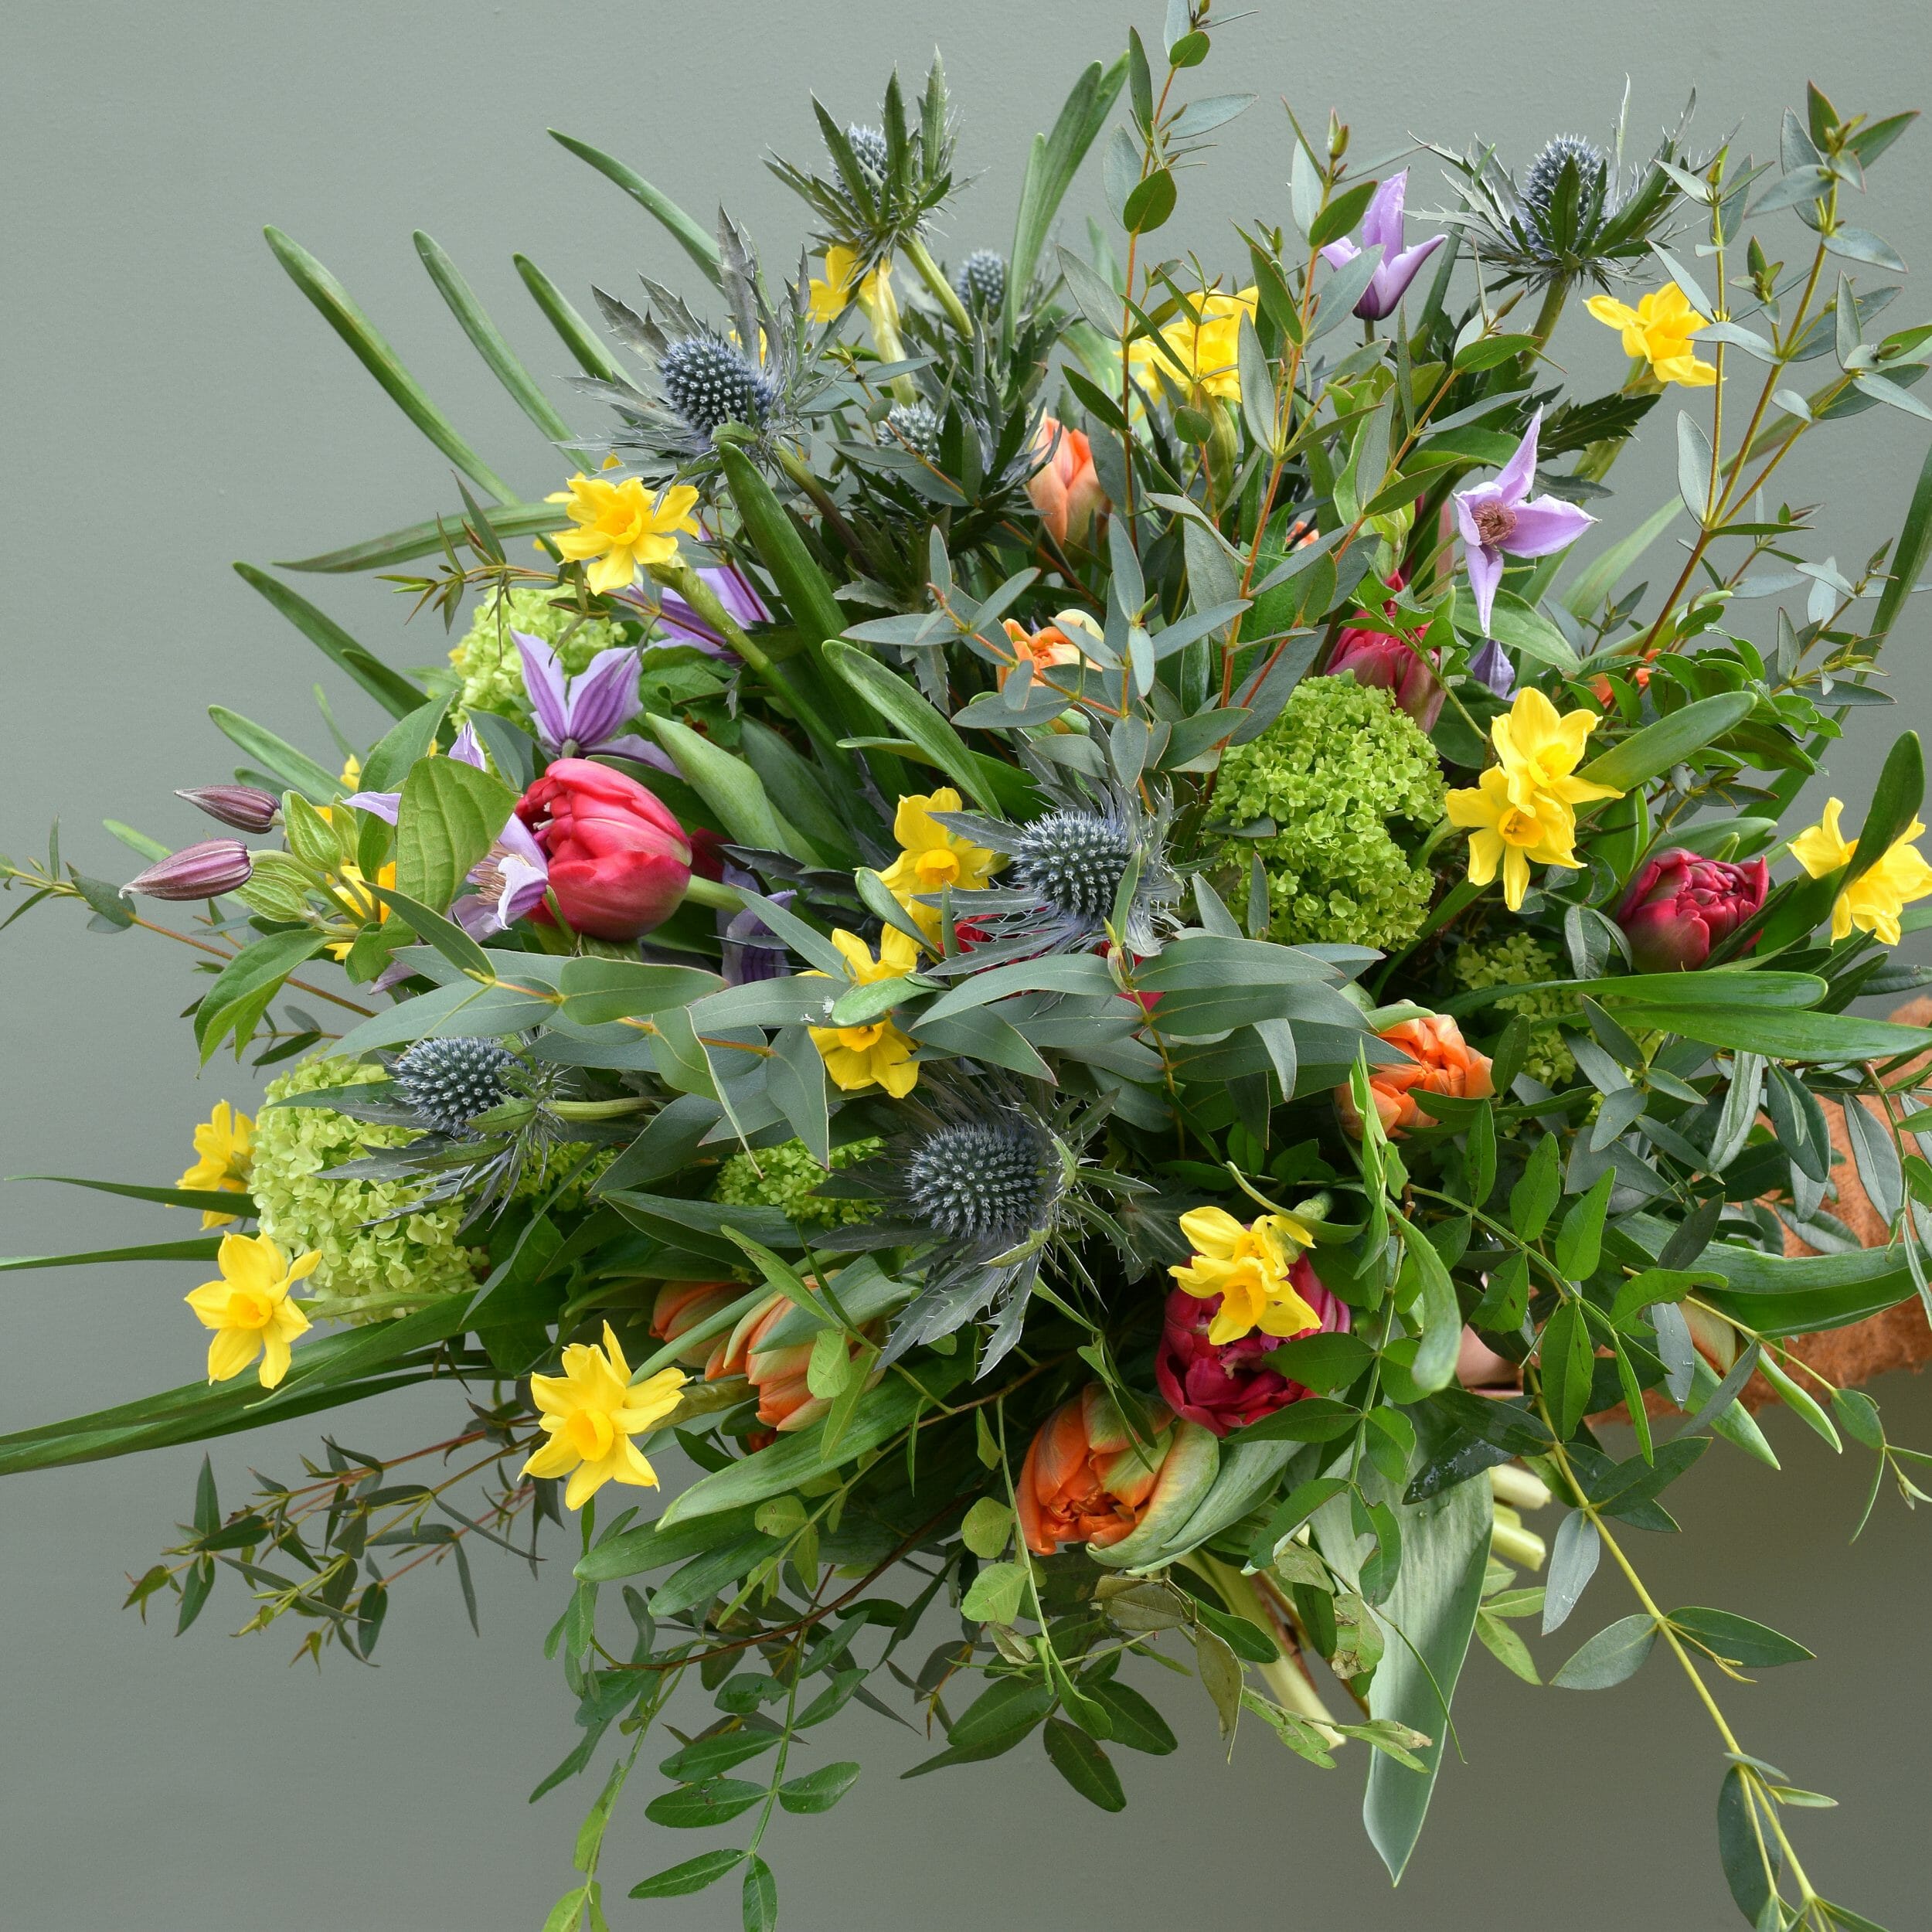 Photo showing a sample of a spring flower bouquet of mixed bright colouirs available to order from Kensington flowers London